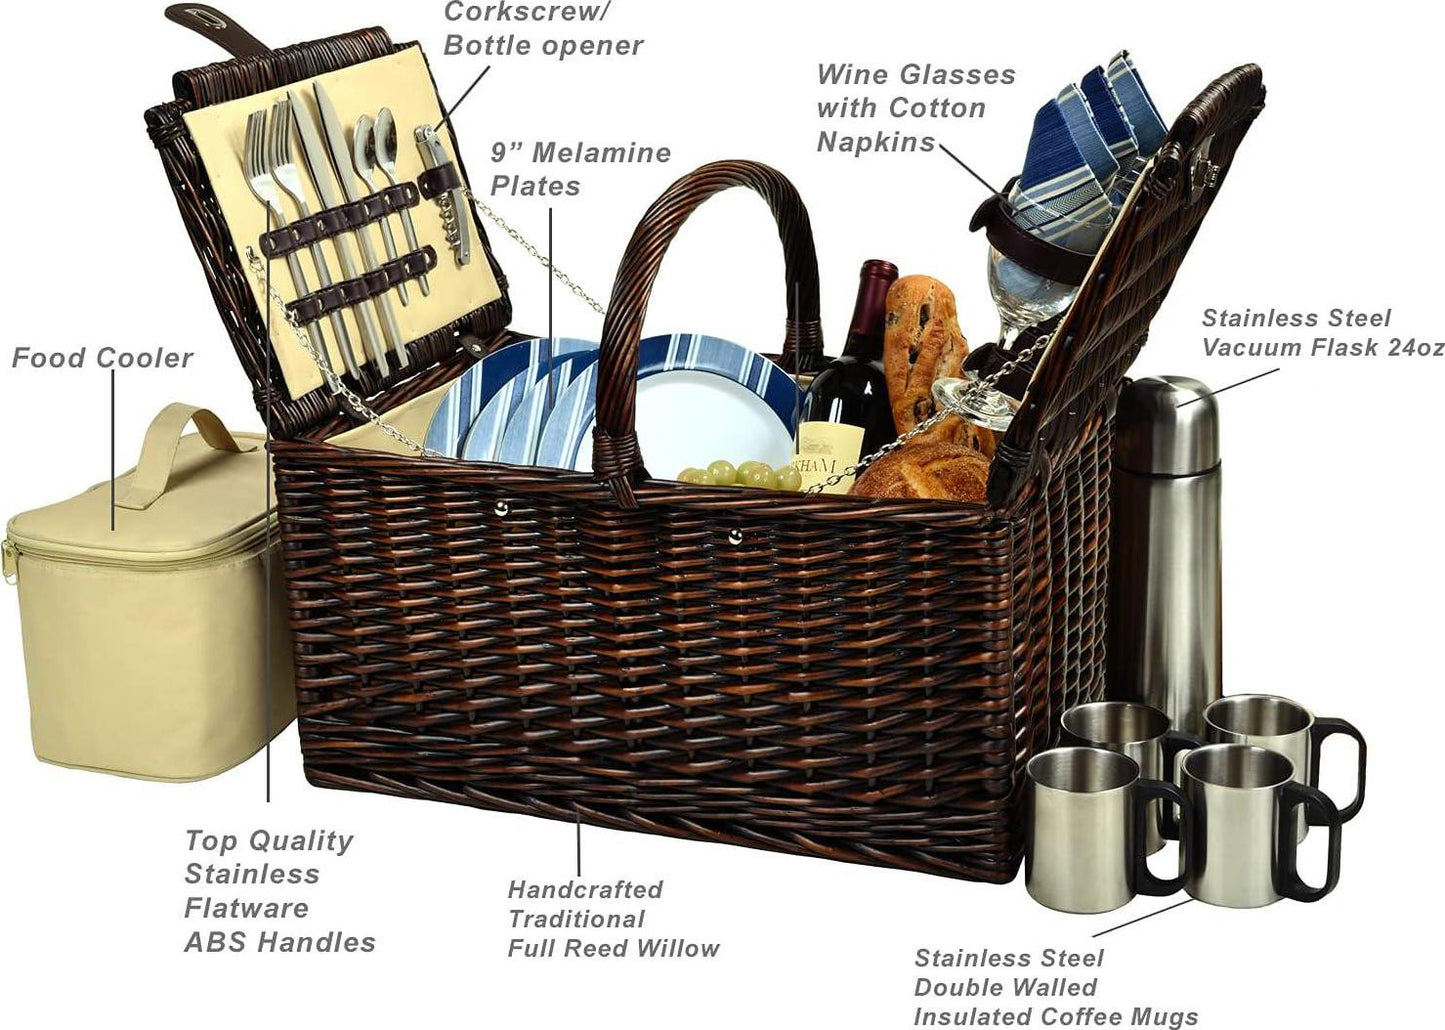 Picnic at Ascot Buckingham Picnic Willow Picnic Basket with Service for 4 and Coffee Service - Designed, Assembled and Quality Approved in the USA